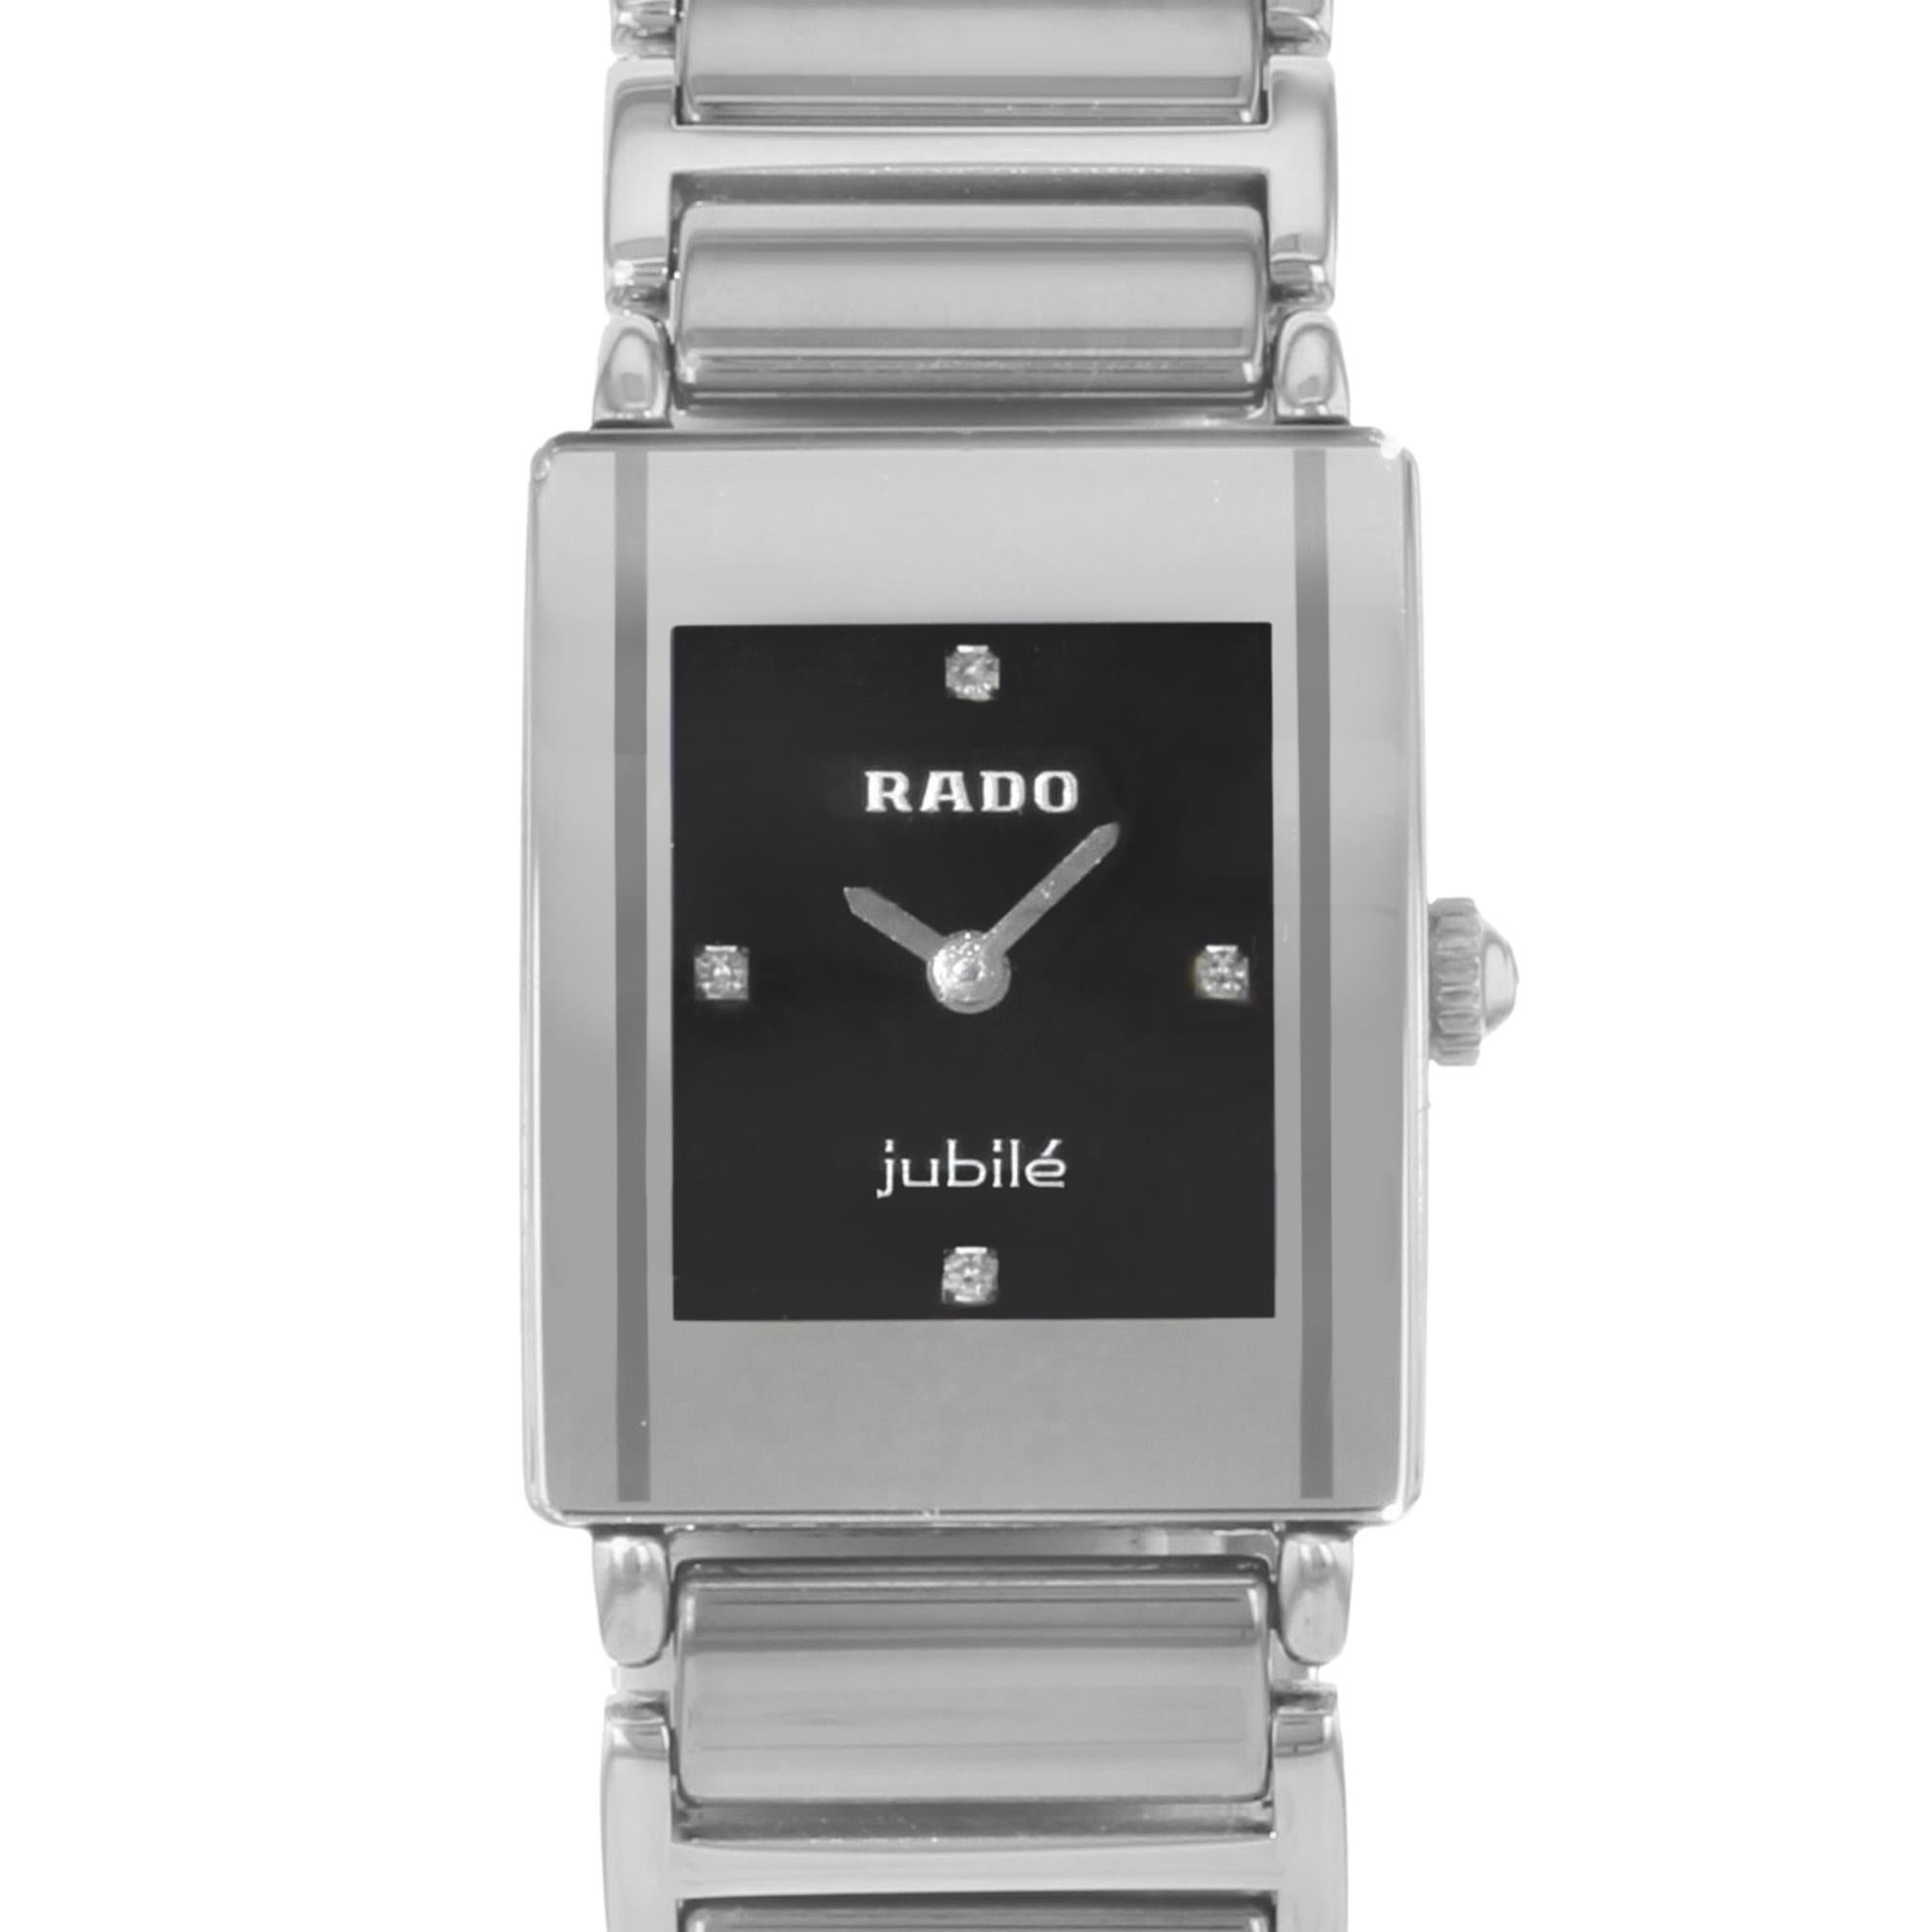 This is an authentic Rado Integral R20488722 with a fully functional Quartz Movement. This wristwatch is a pre-owned model in good condition. Approx wrist fit is 6.75 inches and case diameter 18 mm x 22 mm . This Rado R20488722 Integral Jubile 18mm